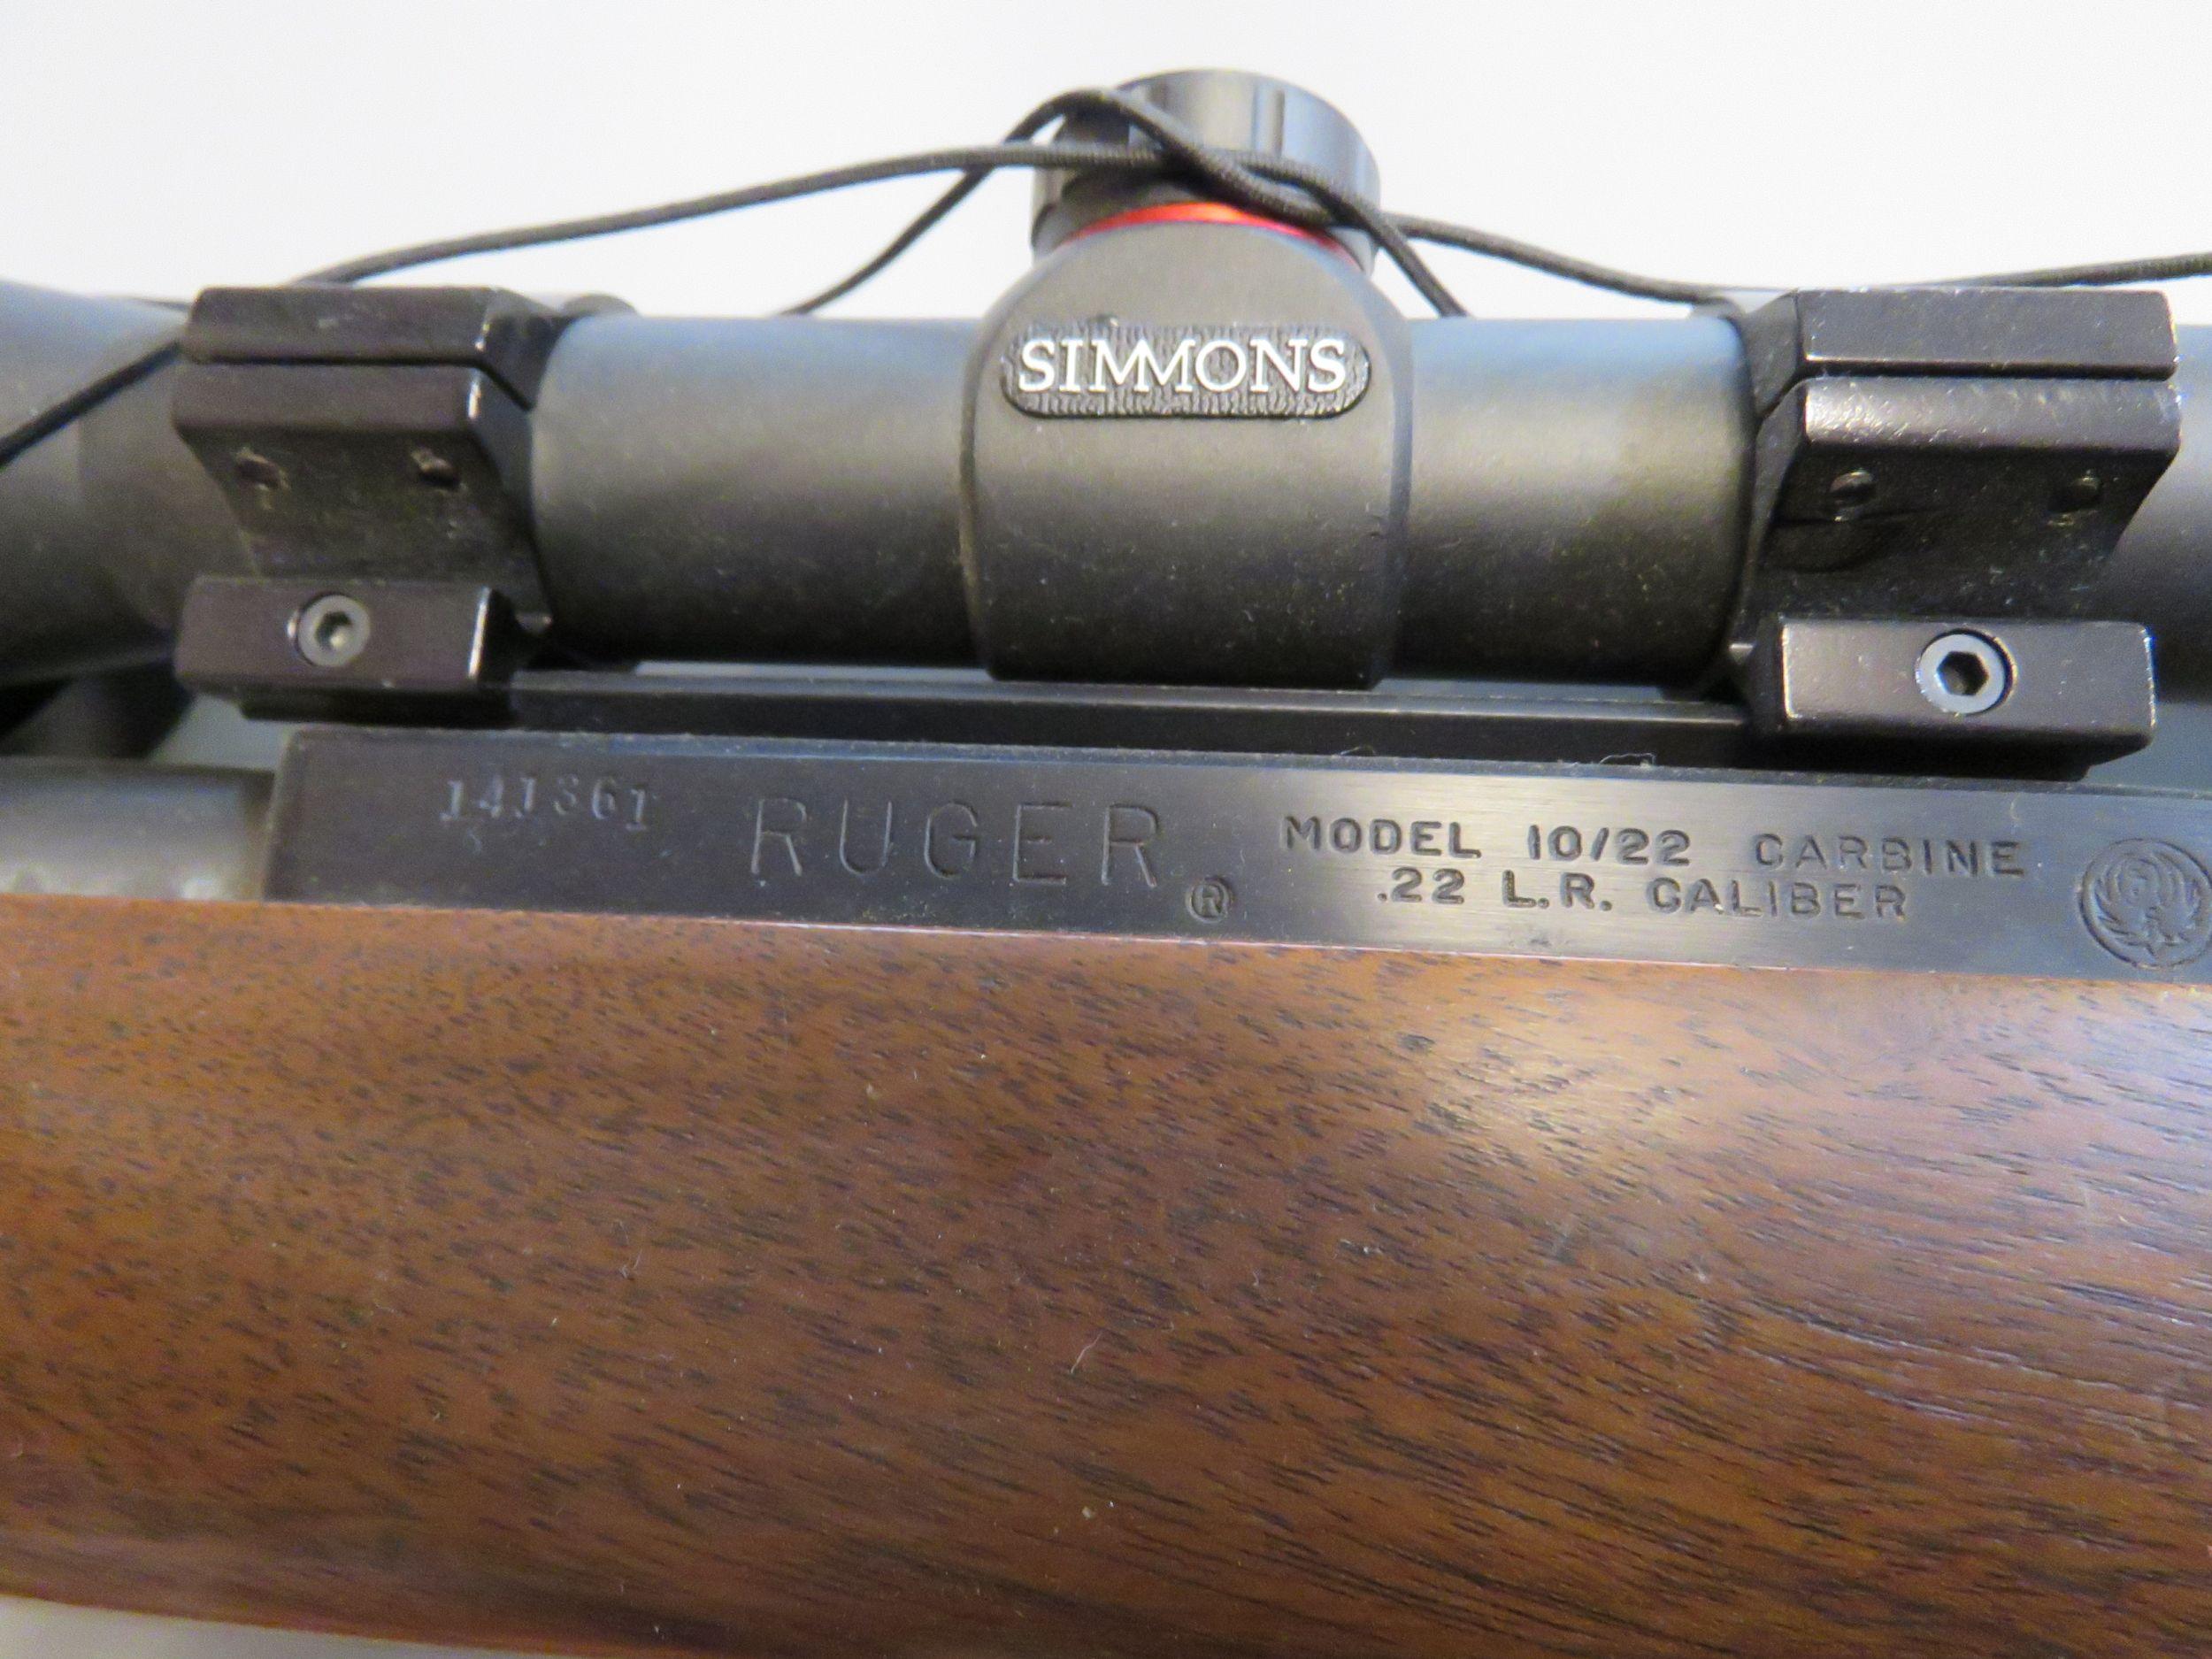 Ruger Model 10/22 .22LR Rifle with Simmons Scope 141361